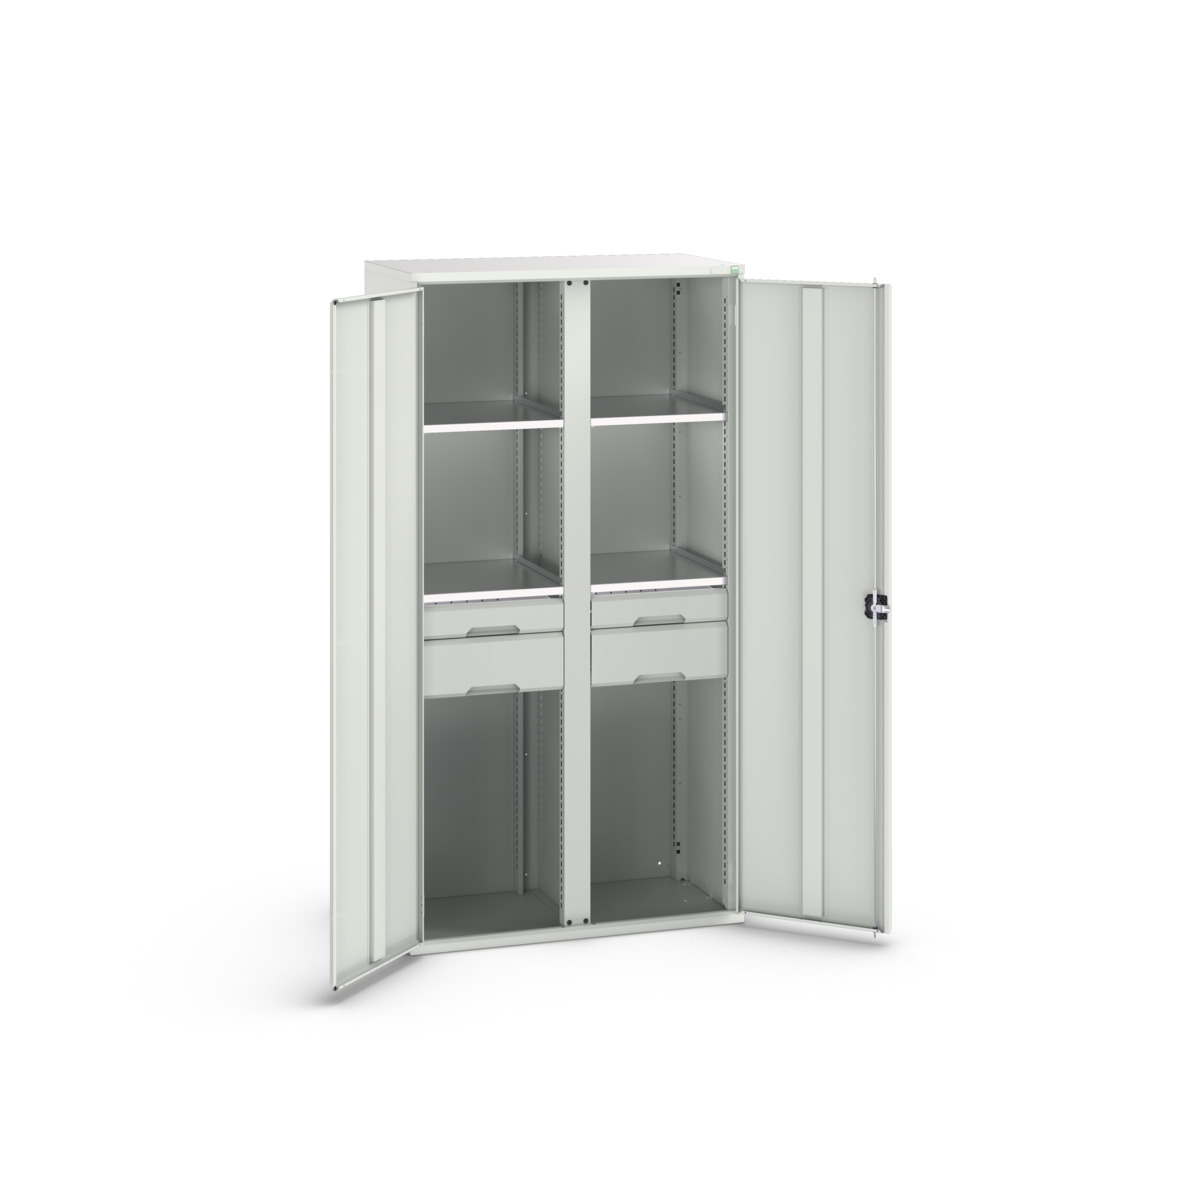 16926582.16 - verso kitted cupboard